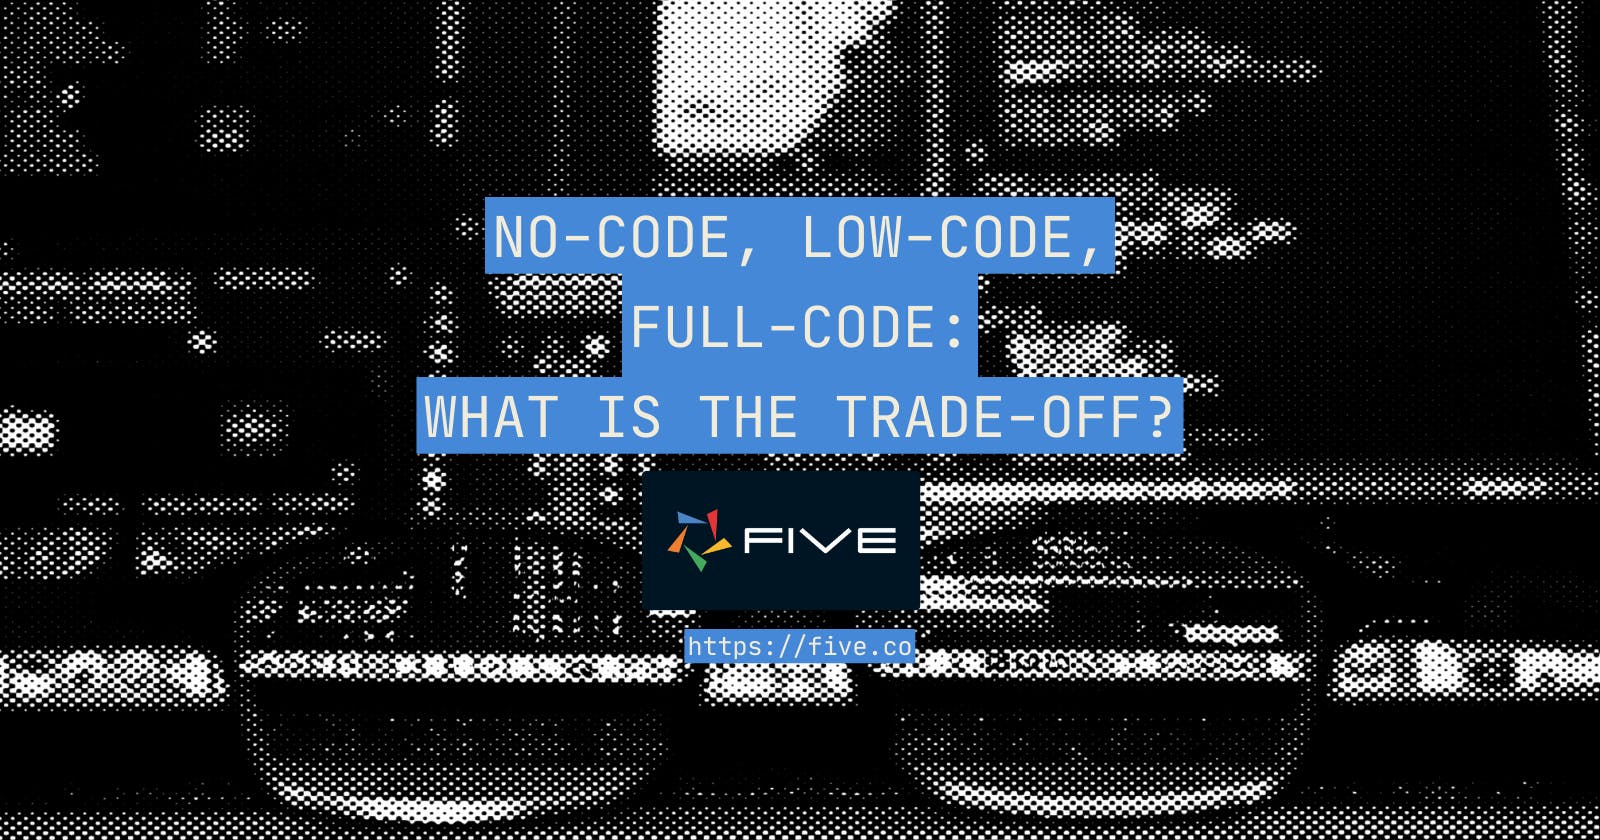 No-Code, Low-Code, Full-Code: What Is The Trade-Off? [Infographic]